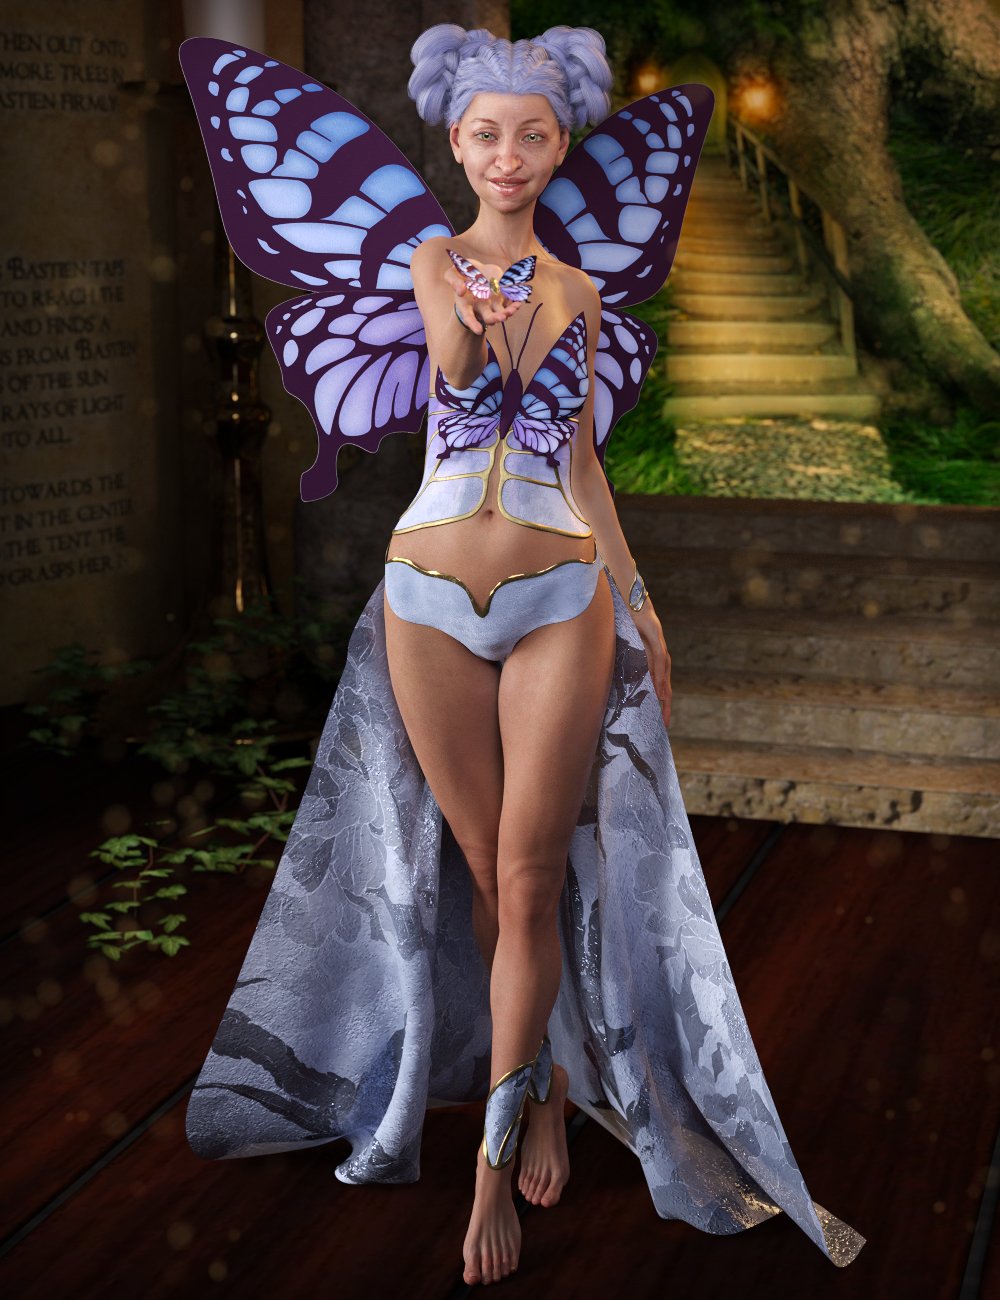 dforce butterfly outfit textures 00 main daz3d 1711985474